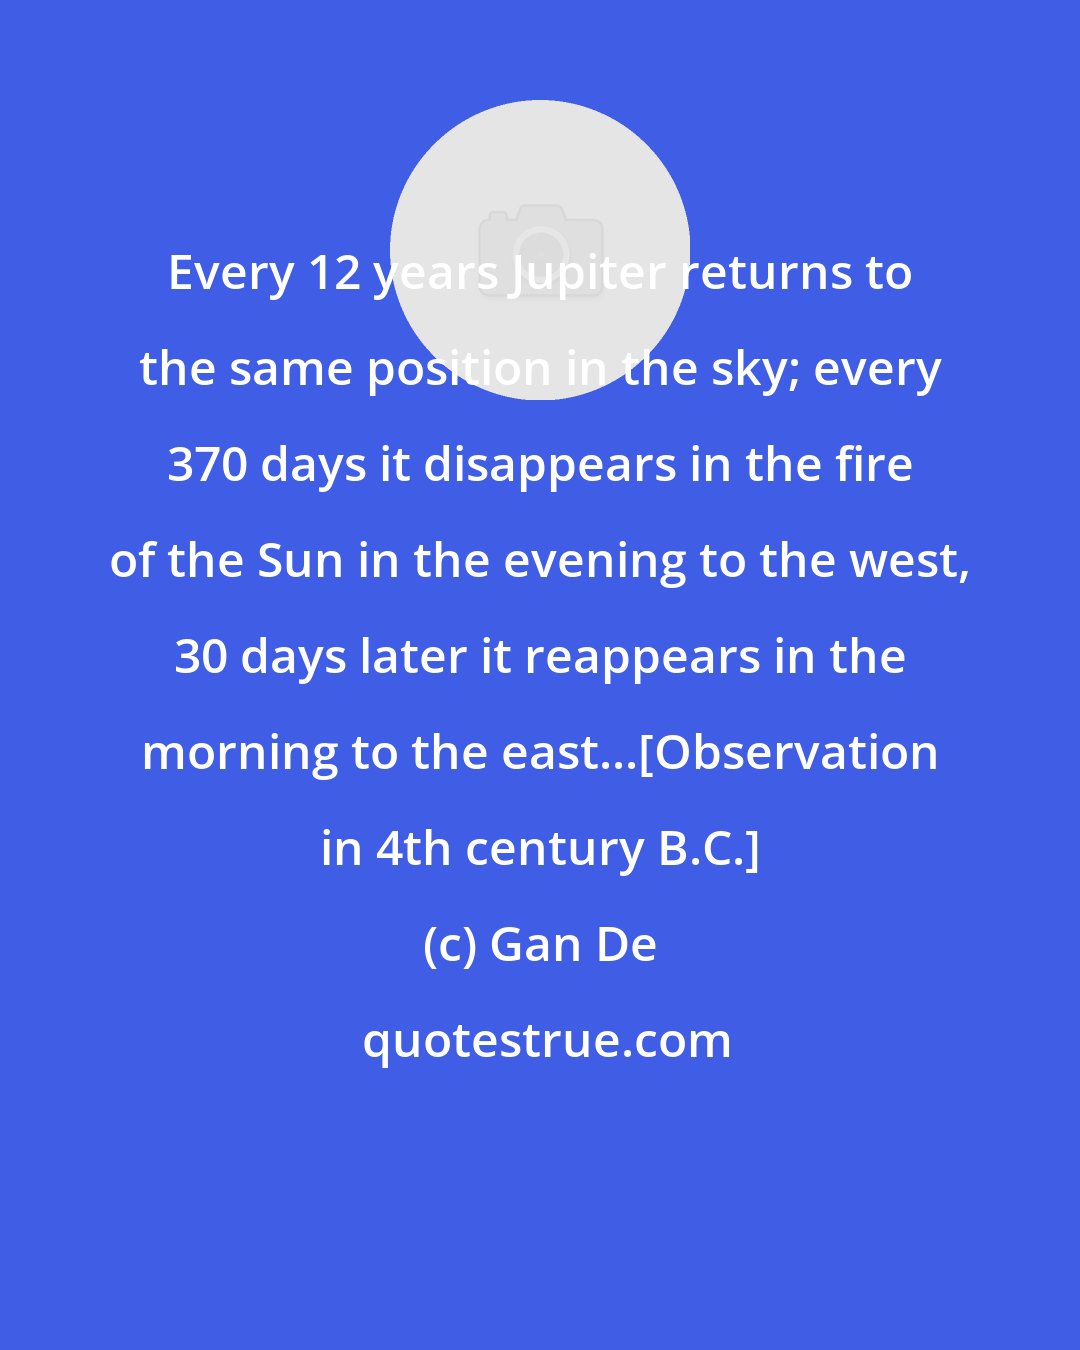 Gan De: Every 12 years Jupiter returns to the same position in the sky; every 370 days it disappears in the fire of the Sun in the evening to the west, 30 days later it reappears in the morning to the east...[Observation in 4th century B.C.]